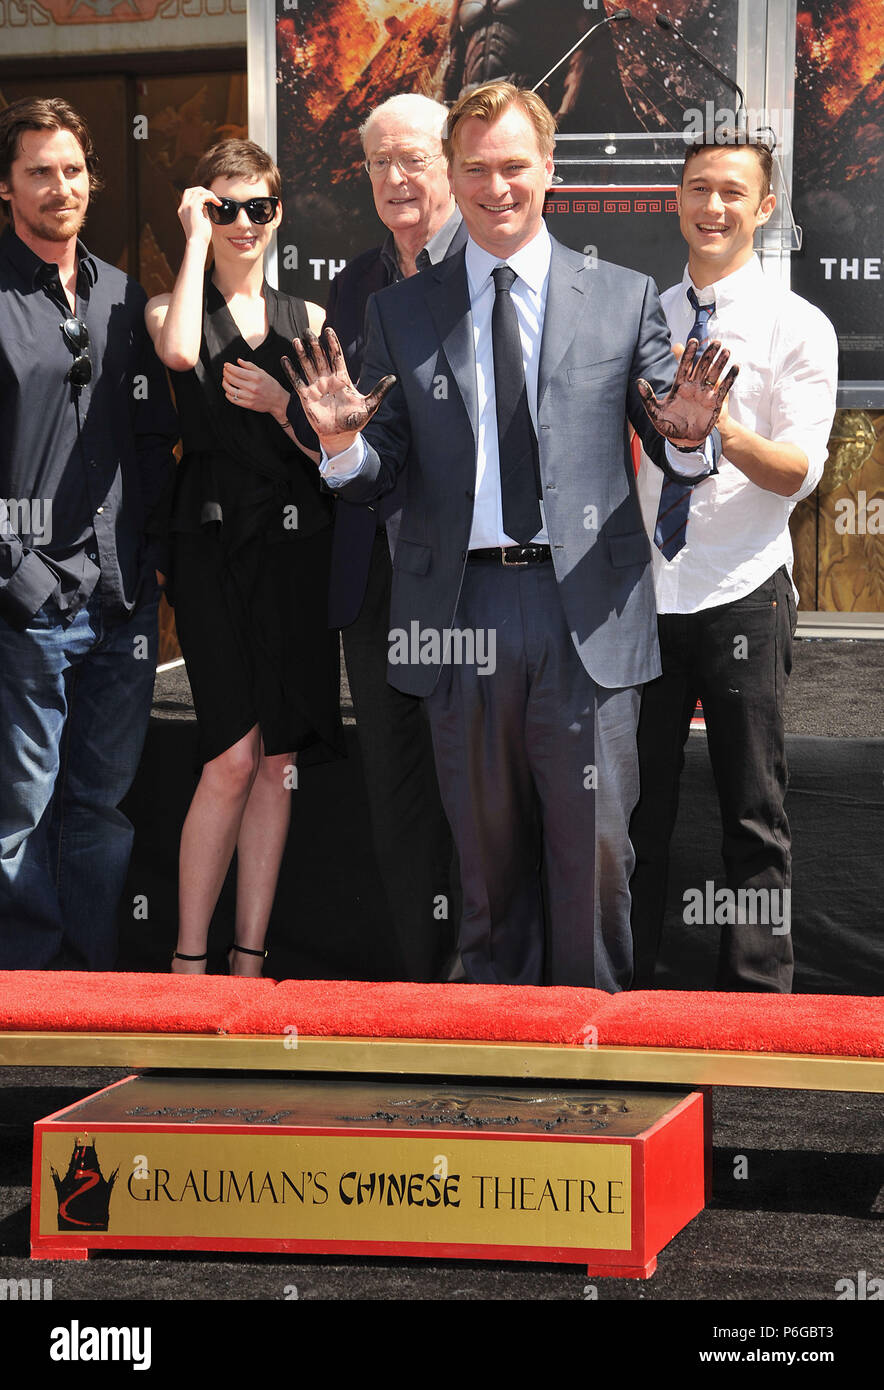 Christopher Nolan Honored with Hand and Foot Print Ceremony at the Chinese  Theatre In Los Angeles. the cast of Dark Knight Rises, Batman Gary Oldman,  Michael Caine, Anne Hathaway, Christian Bale, Joseph